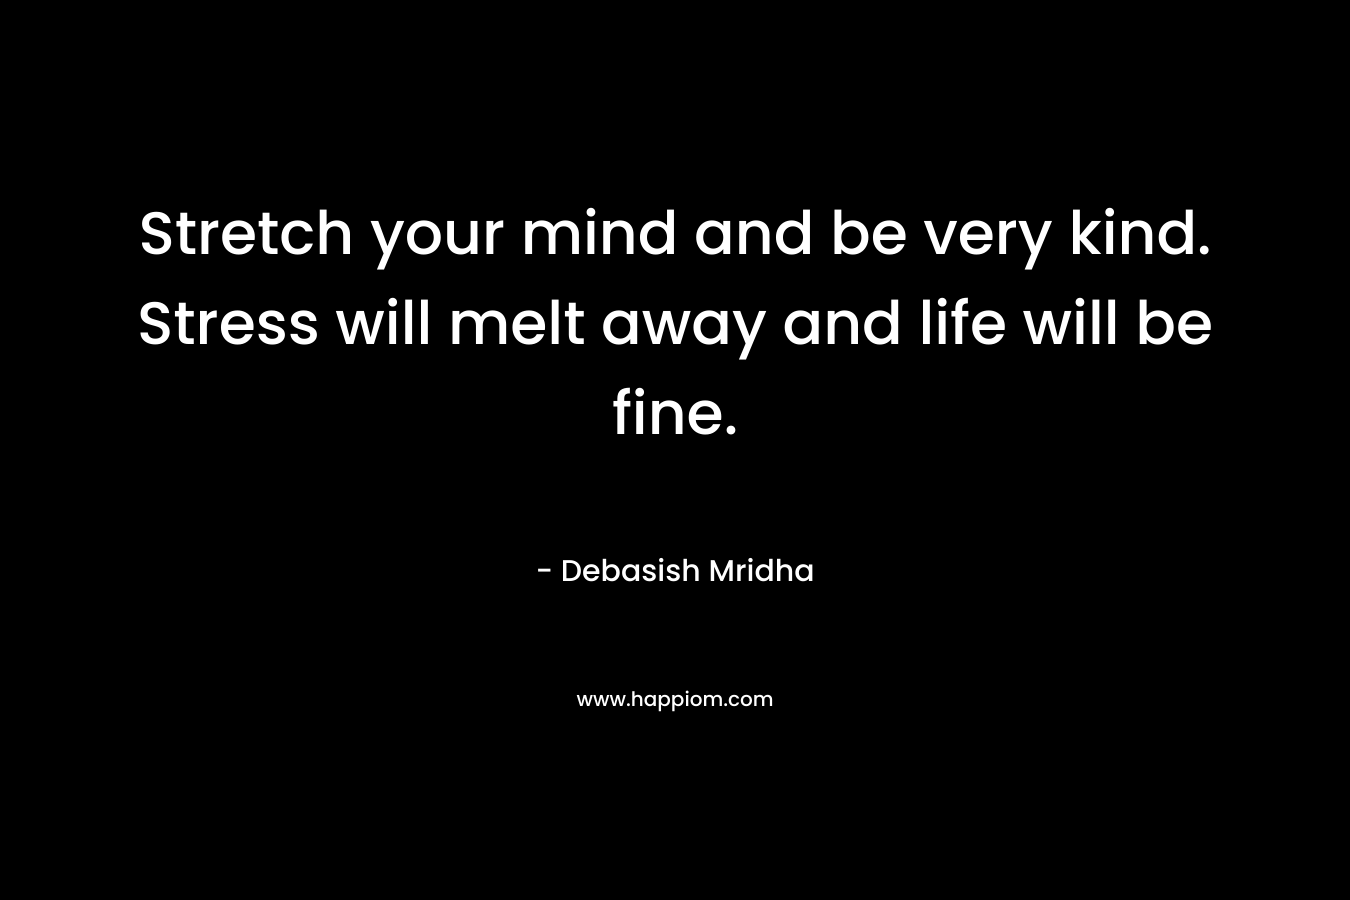 Stretch your mind and be very kind. Stress will melt away and life will be fine. – Debasish Mridha